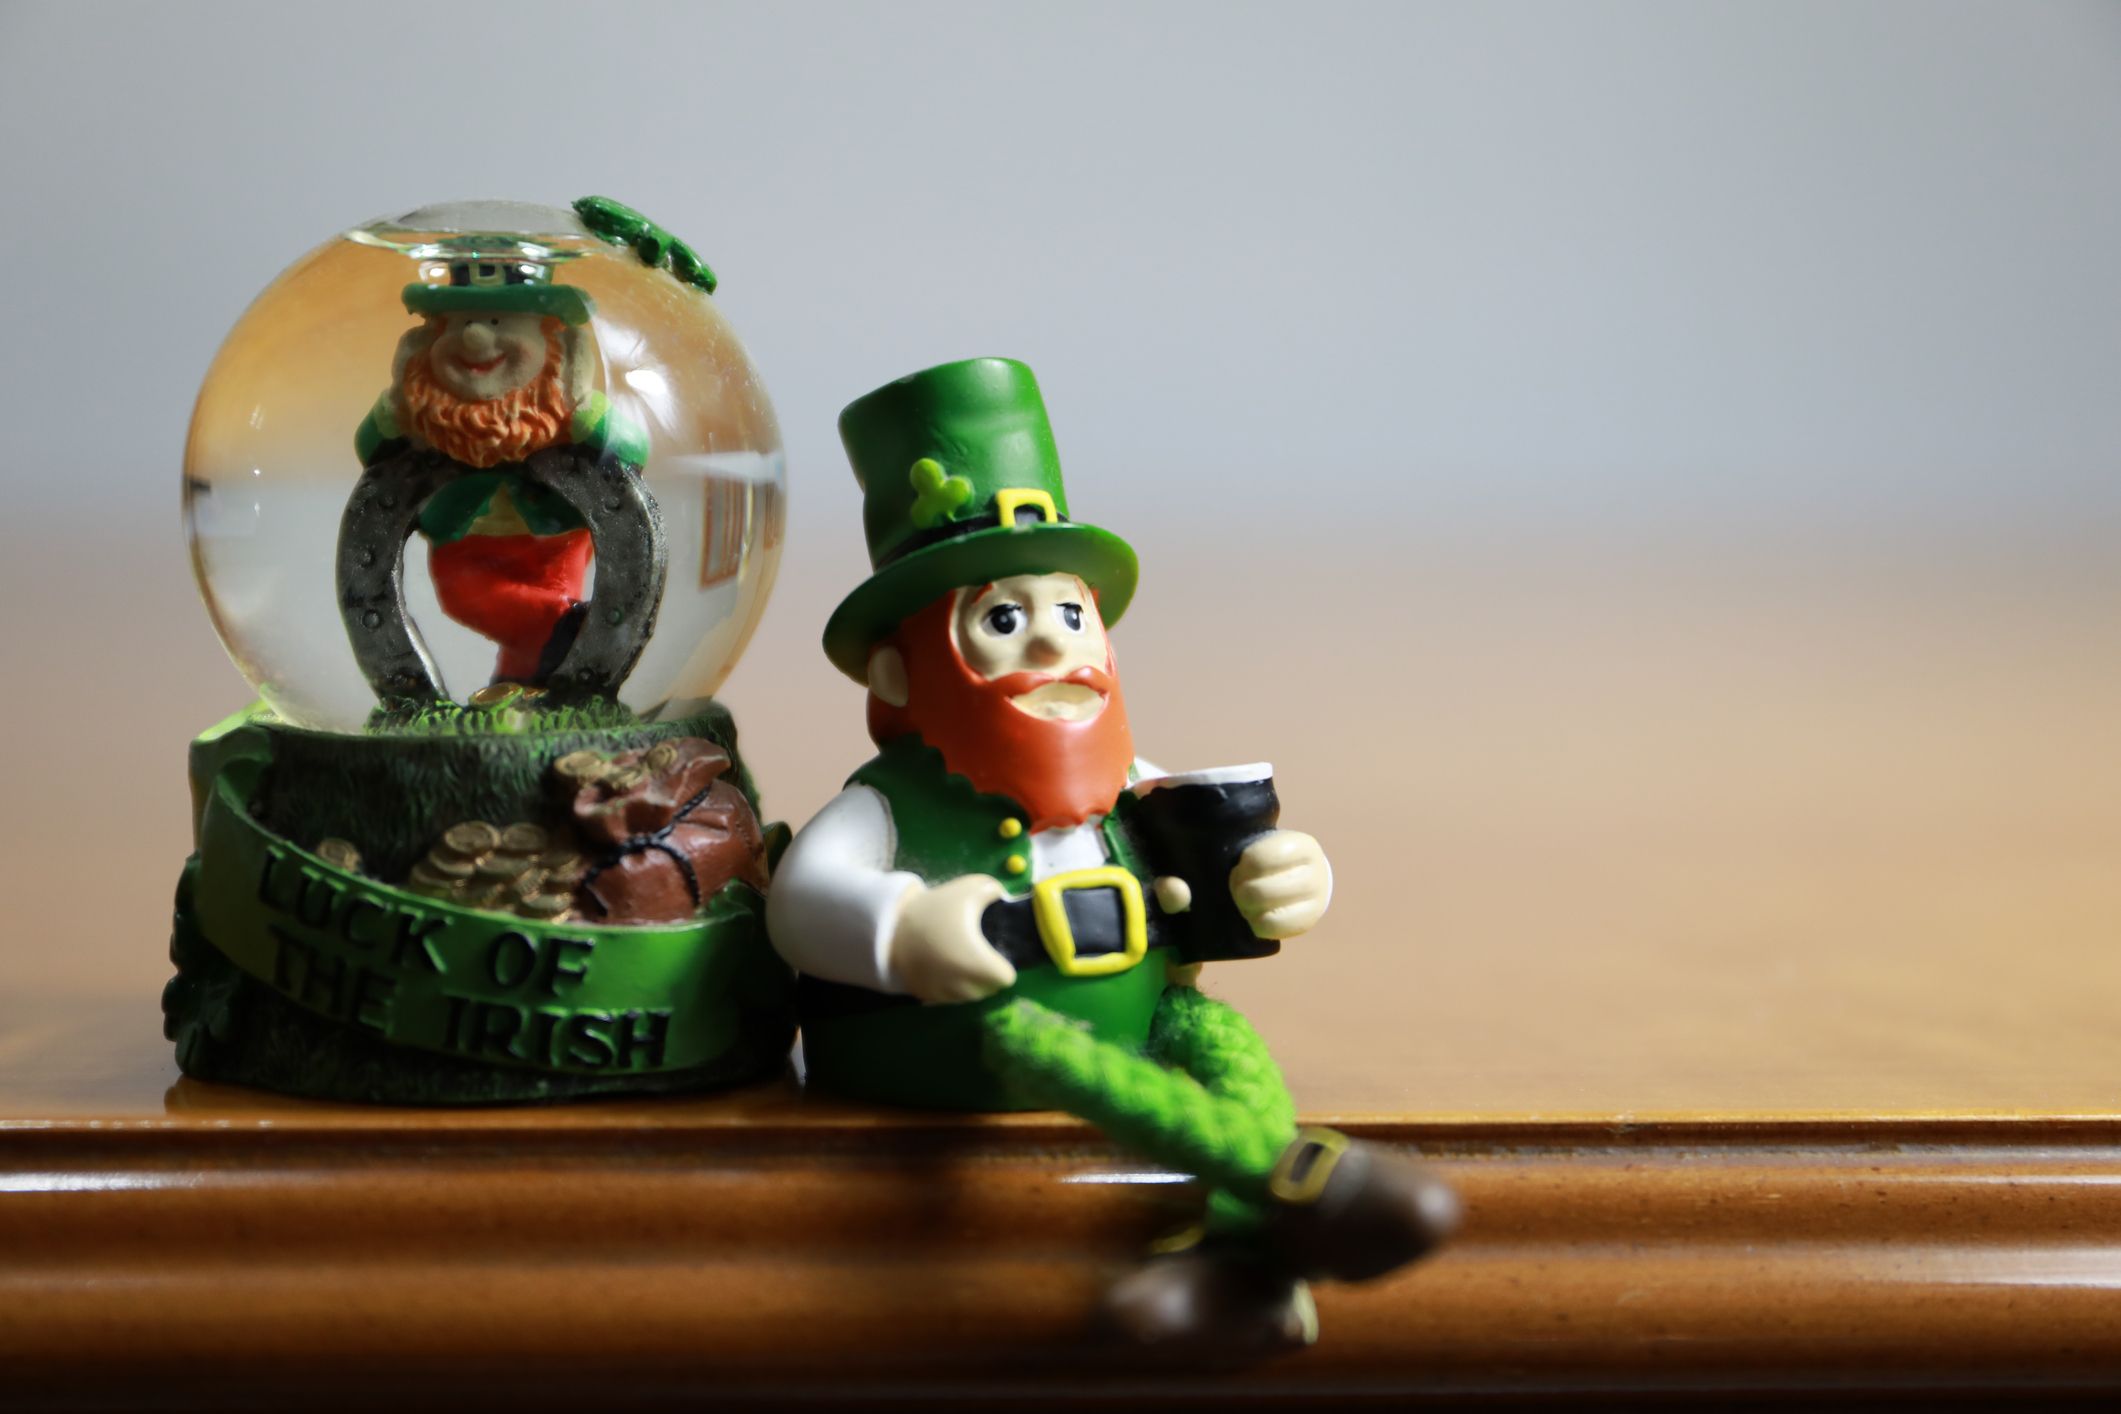 St. Patrick's Day traditions, explained - Vox